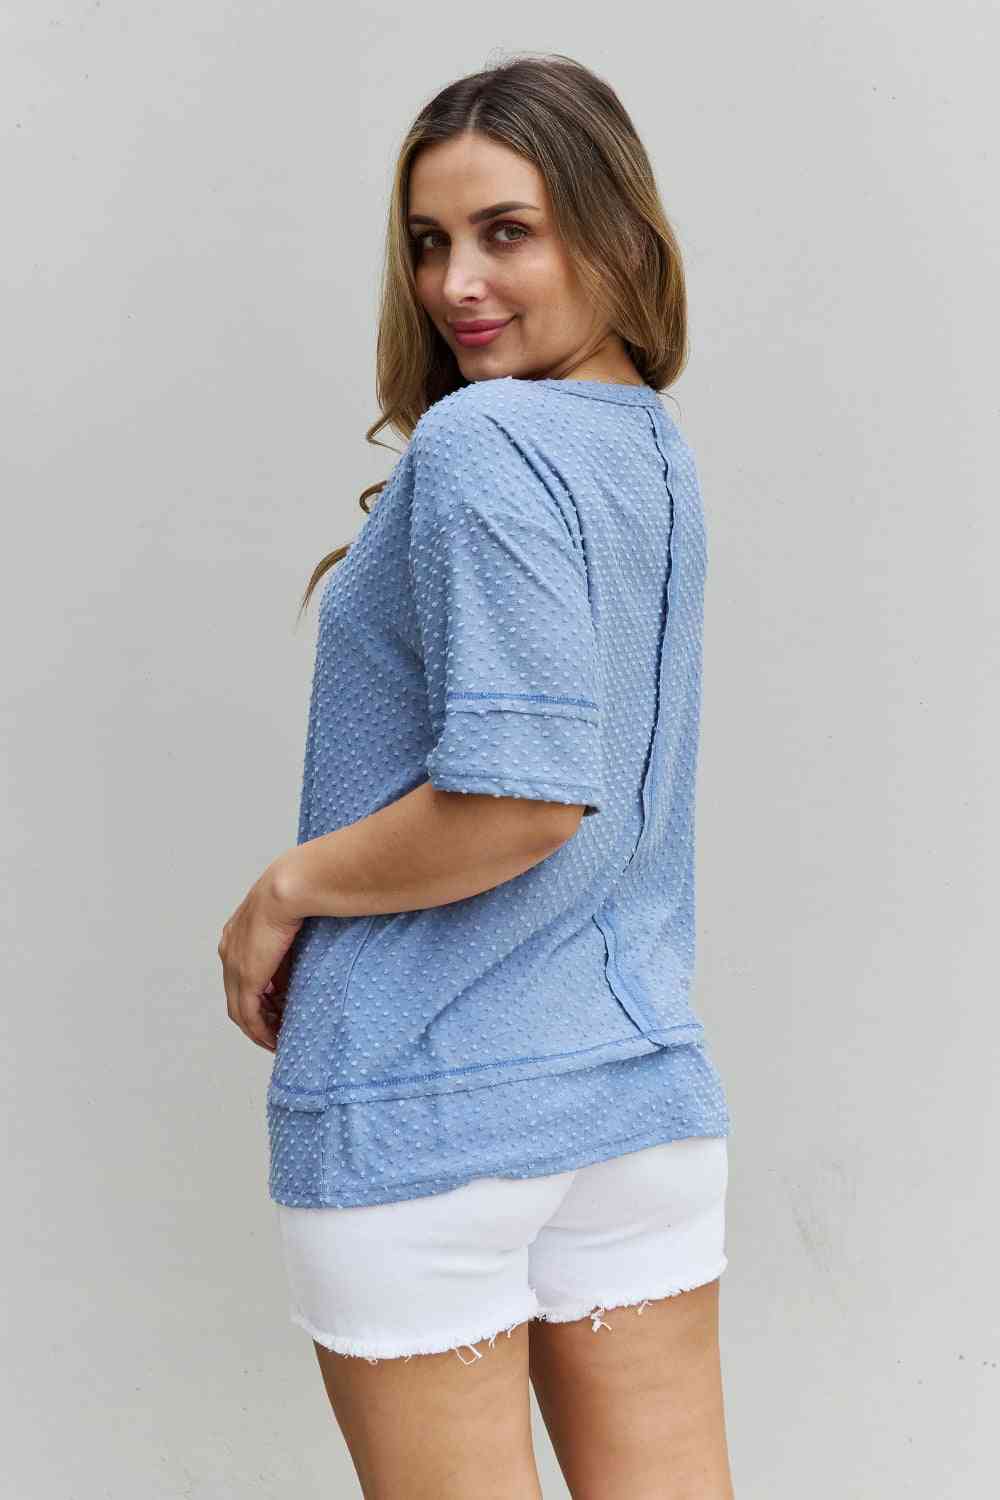 Cater 2 You Swiss Dot Reverse Stitch Short Sleeve Top - Camis & Tops - Shirts & Tops - 2 - 2024